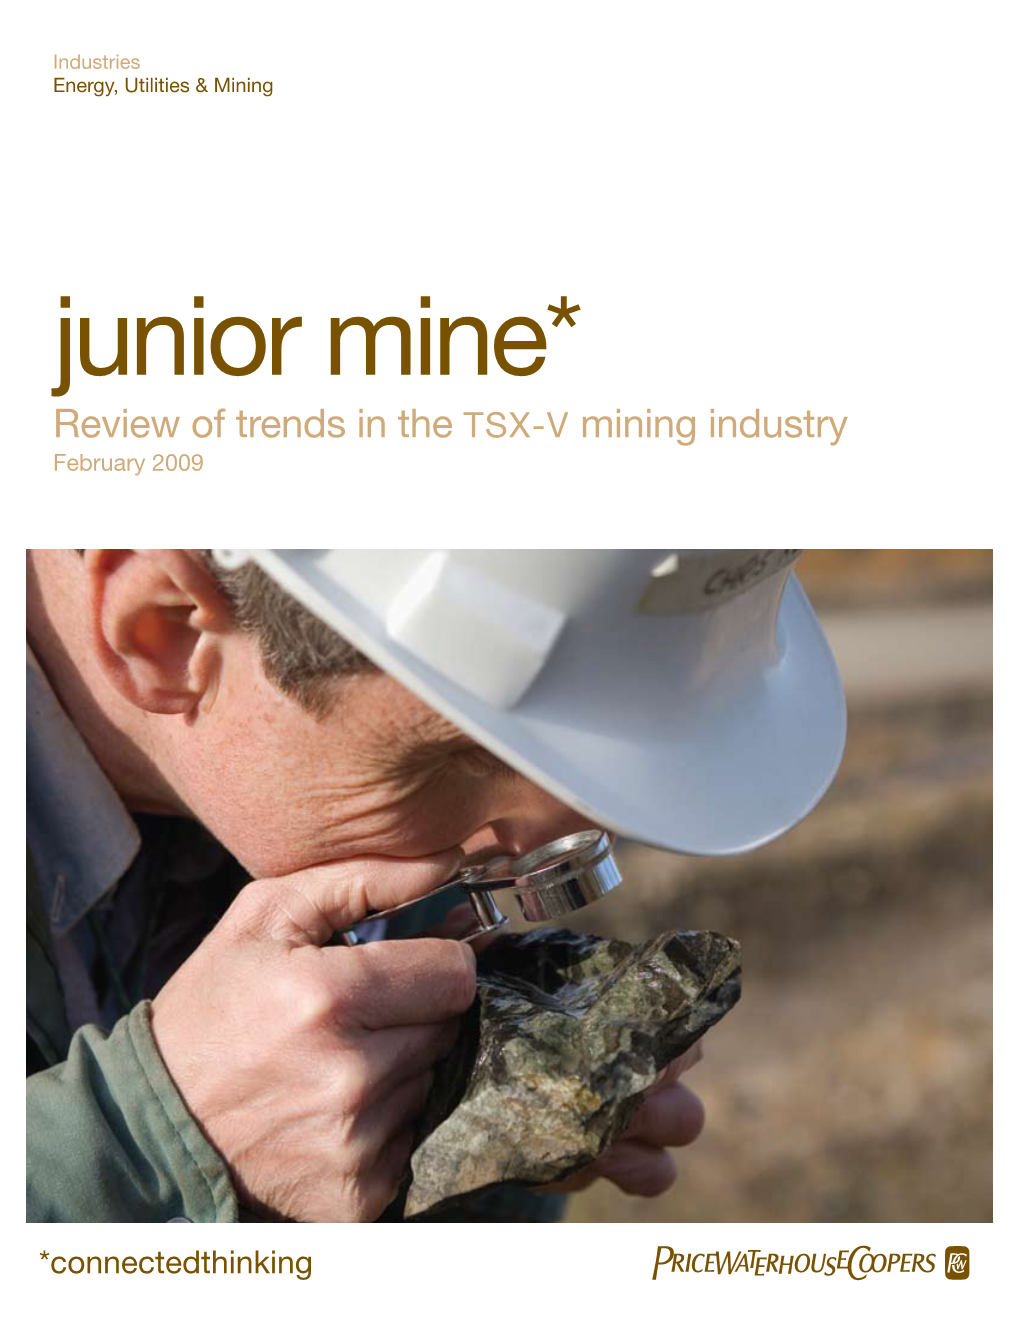 Junior Mine* Review of Trends in the TSX-V Mining Industry February 2009